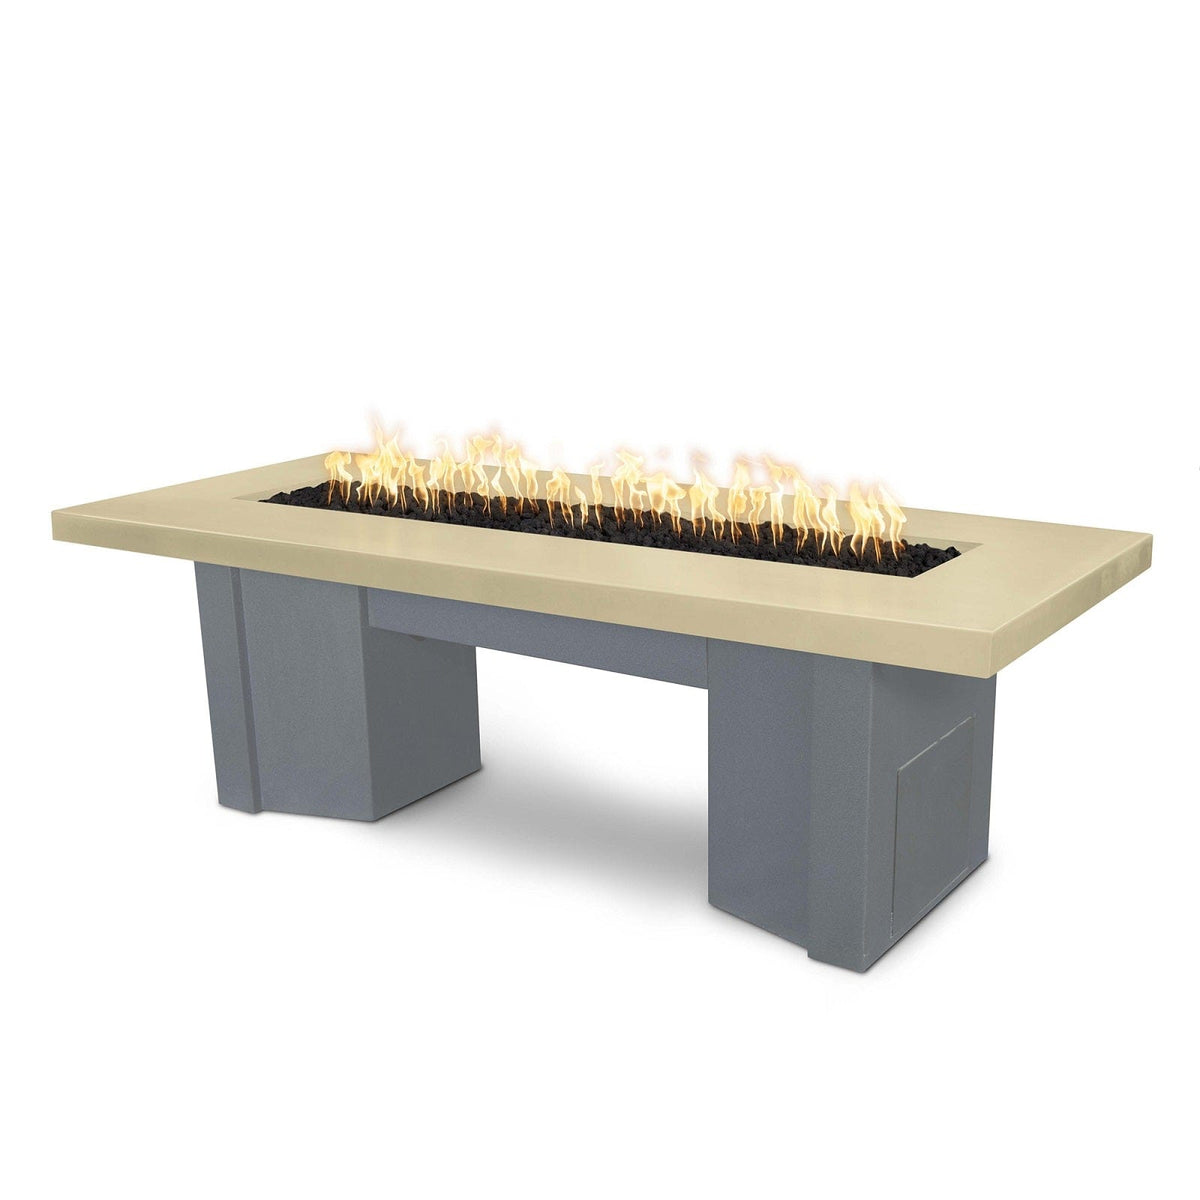 The Outdoor Plus Fire Features Vanilla (-VAN) / Gray Powder Coated Steel (-GRY) The Outdoor Plus 78&quot; Alameda Fire Table Smooth Concrete in Liquid Propane - Flame Sense System with Push Button Spark Igniter / OPT-ALMGFRC78FSEN-LP